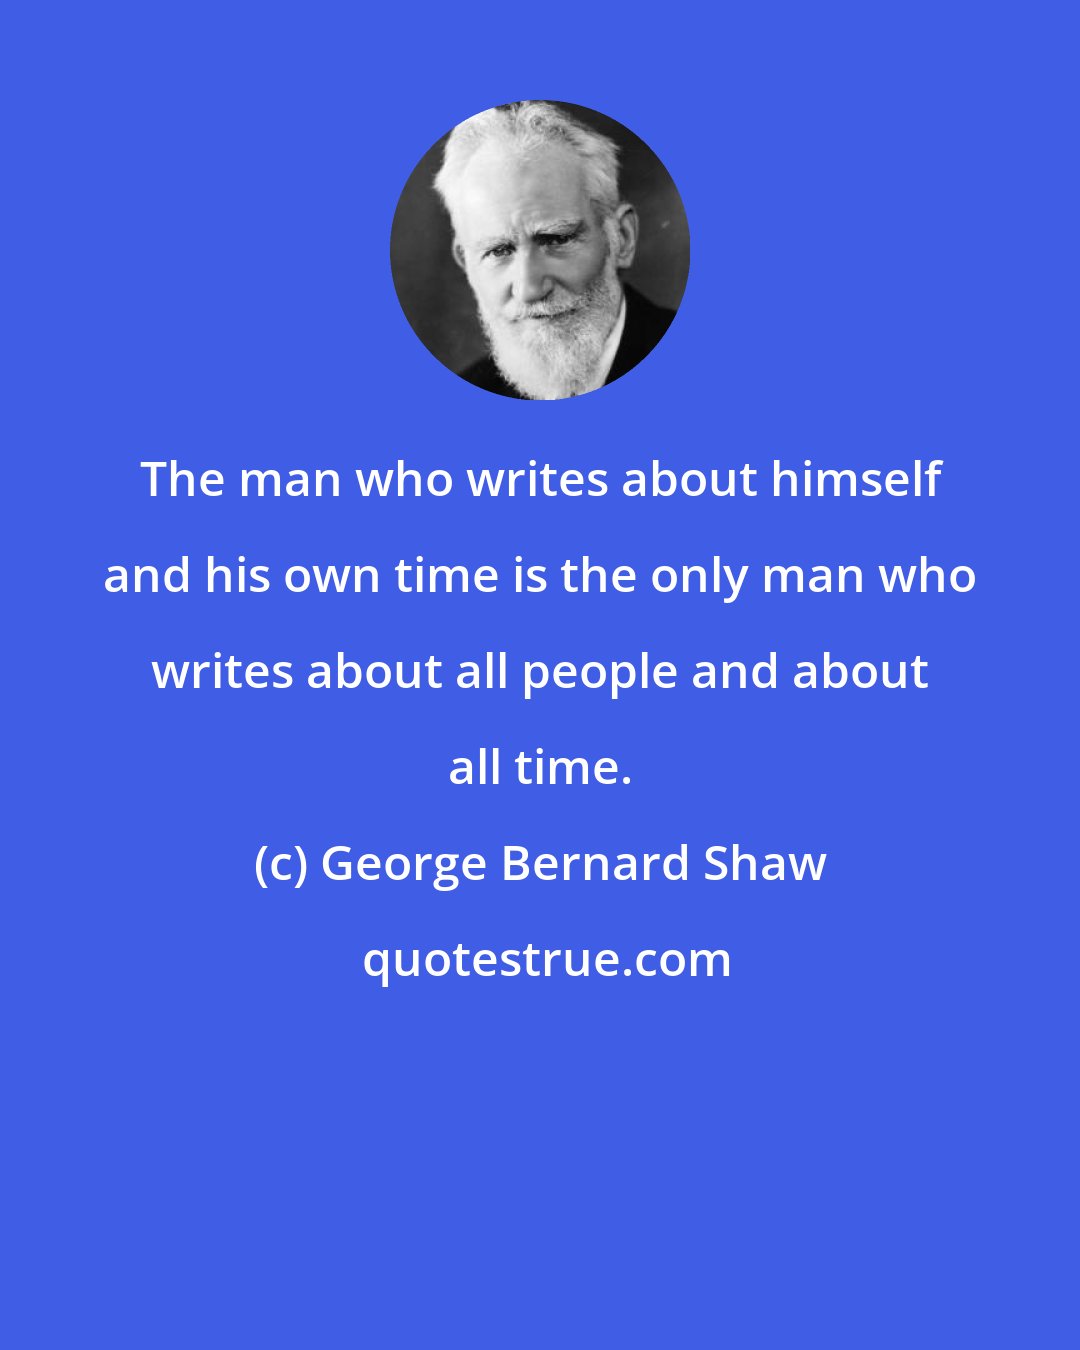 George Bernard Shaw: The man who writes about himself and his own time is the only man who writes about all people and about all time.